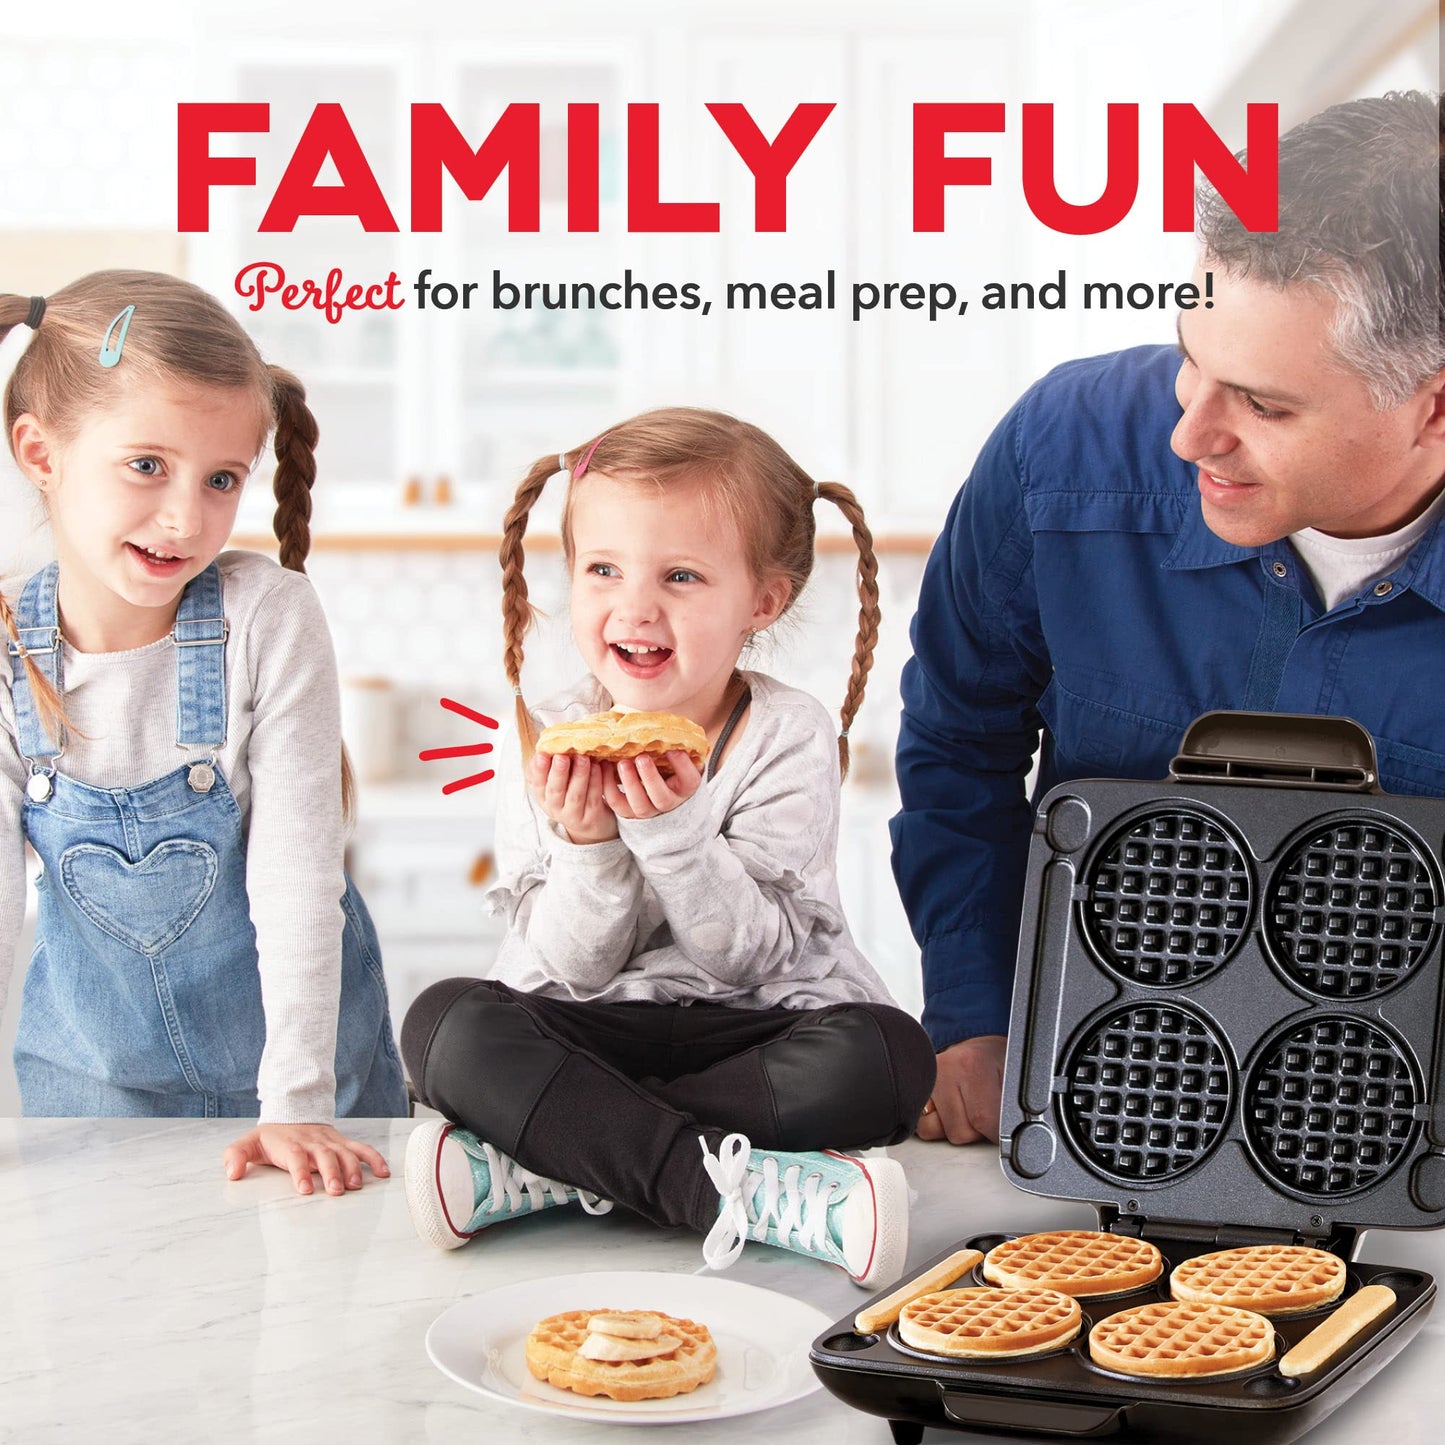 DASH Multi Mini Waffle Maker - Four 4” Waffle Molds, Nonstick Waffle Iron with Quick Heat-Up, PTFE Nonstick Surface - Perfect Mini Waffle Maker for Kids and Families, Just Add Batter